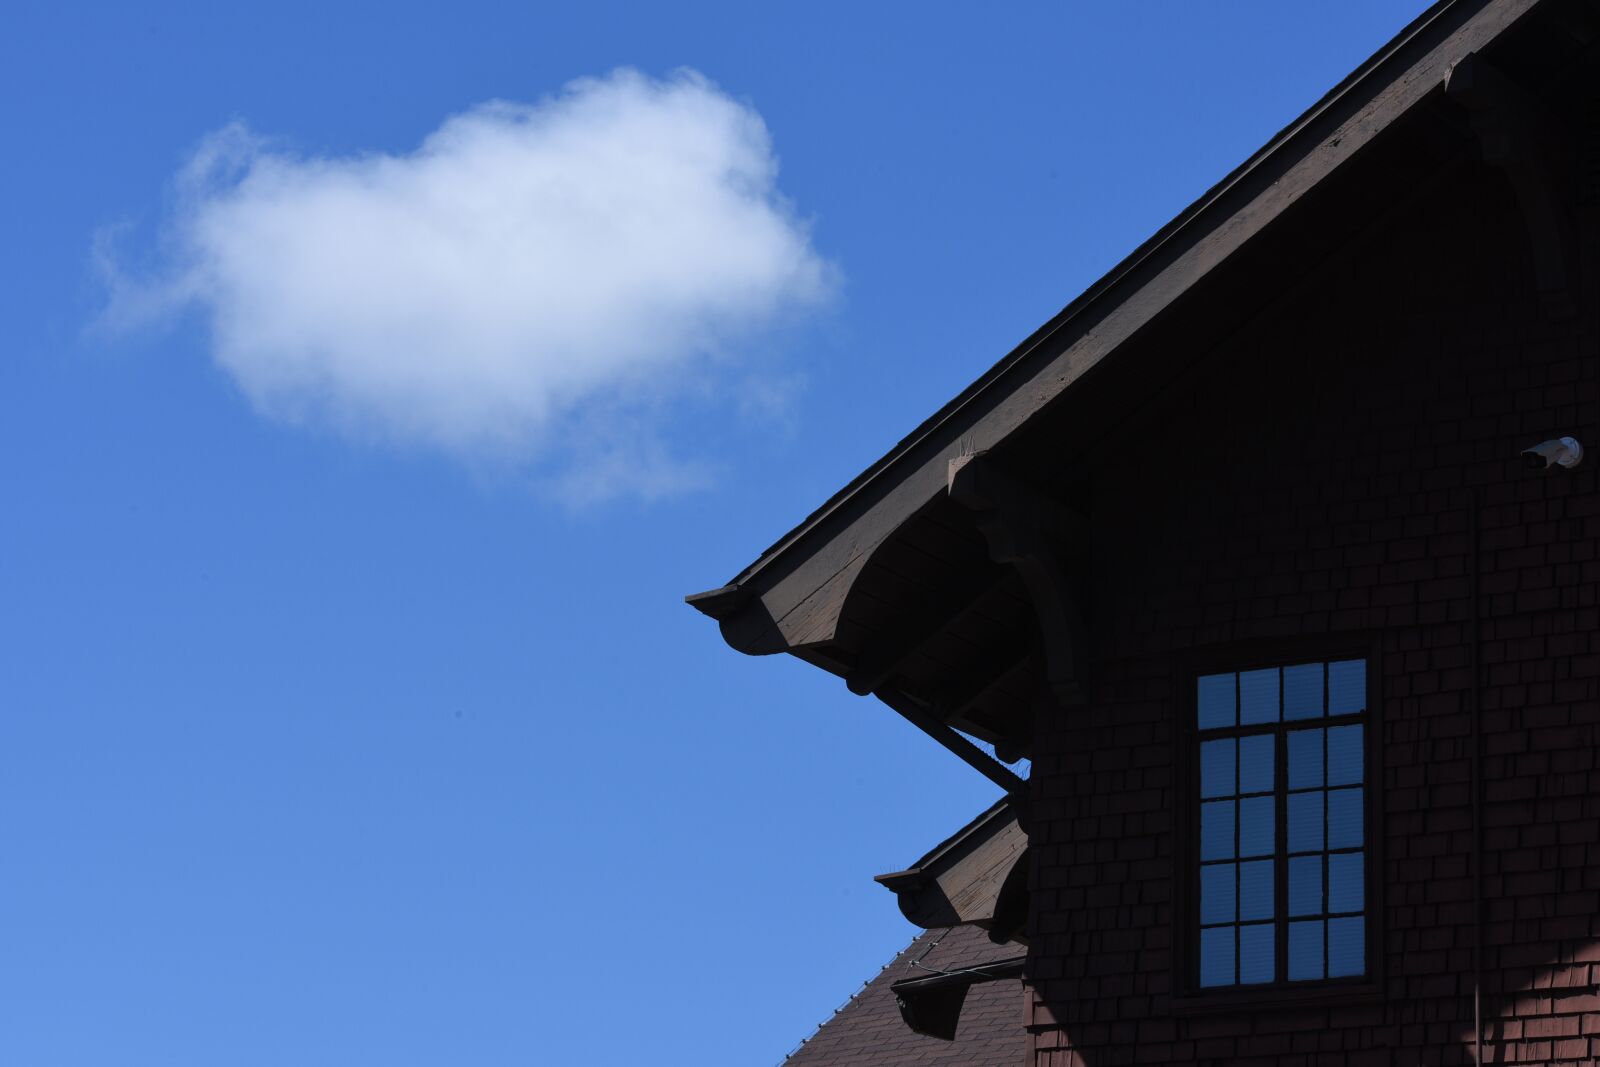 Nikon D810 sample photo. Clouds, house, clouds and photography